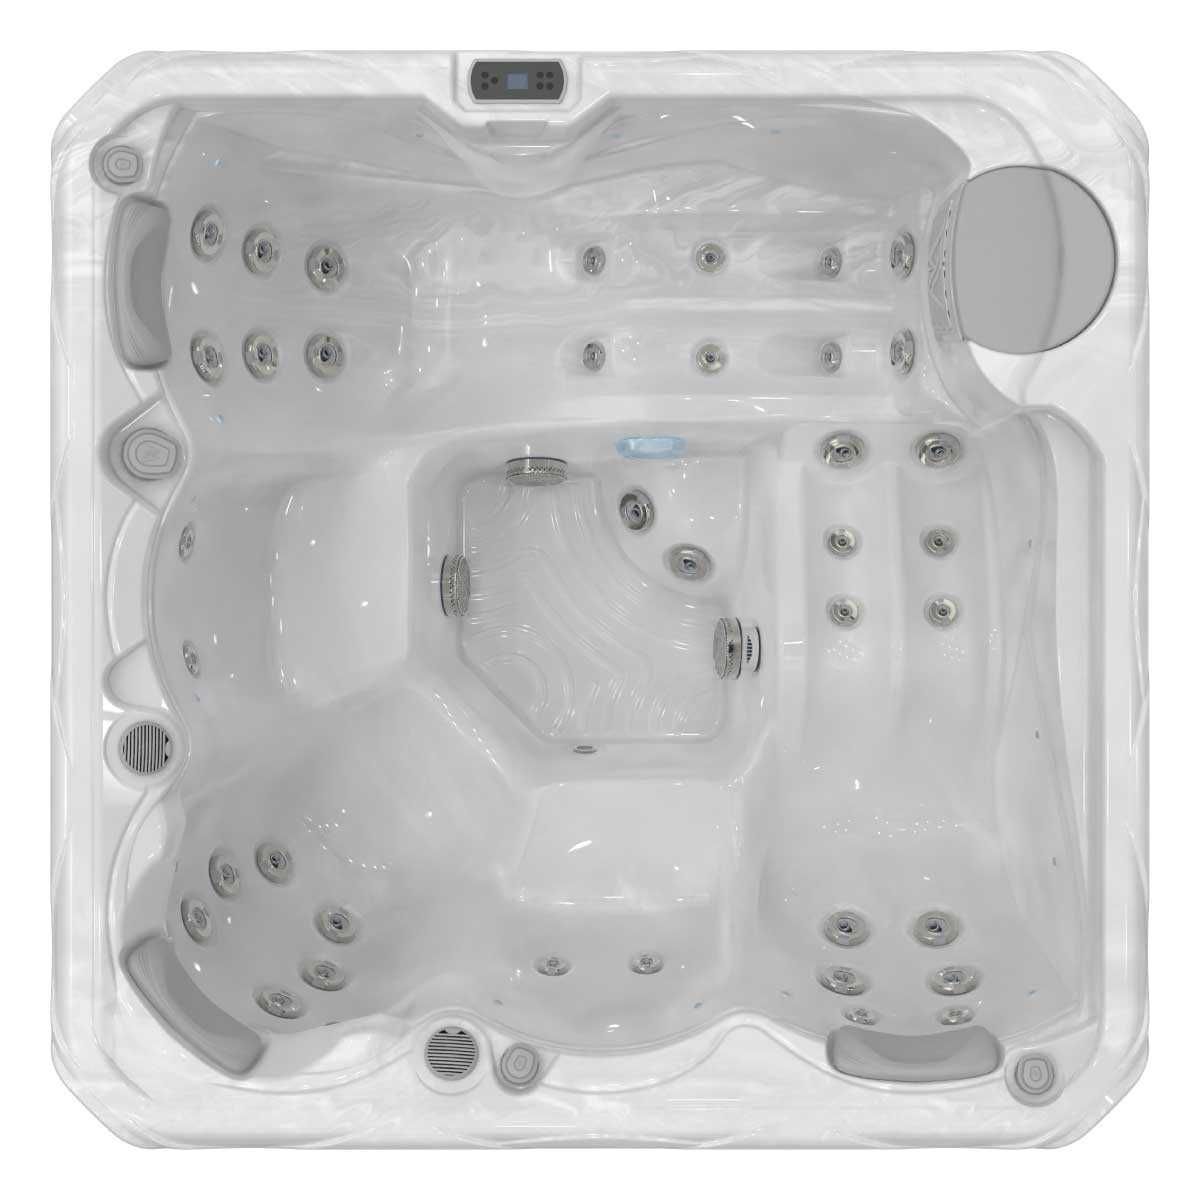 Wellis Budapest Life Deluxe, jacuzzi, wanna spa, hottub, outdoor spa,